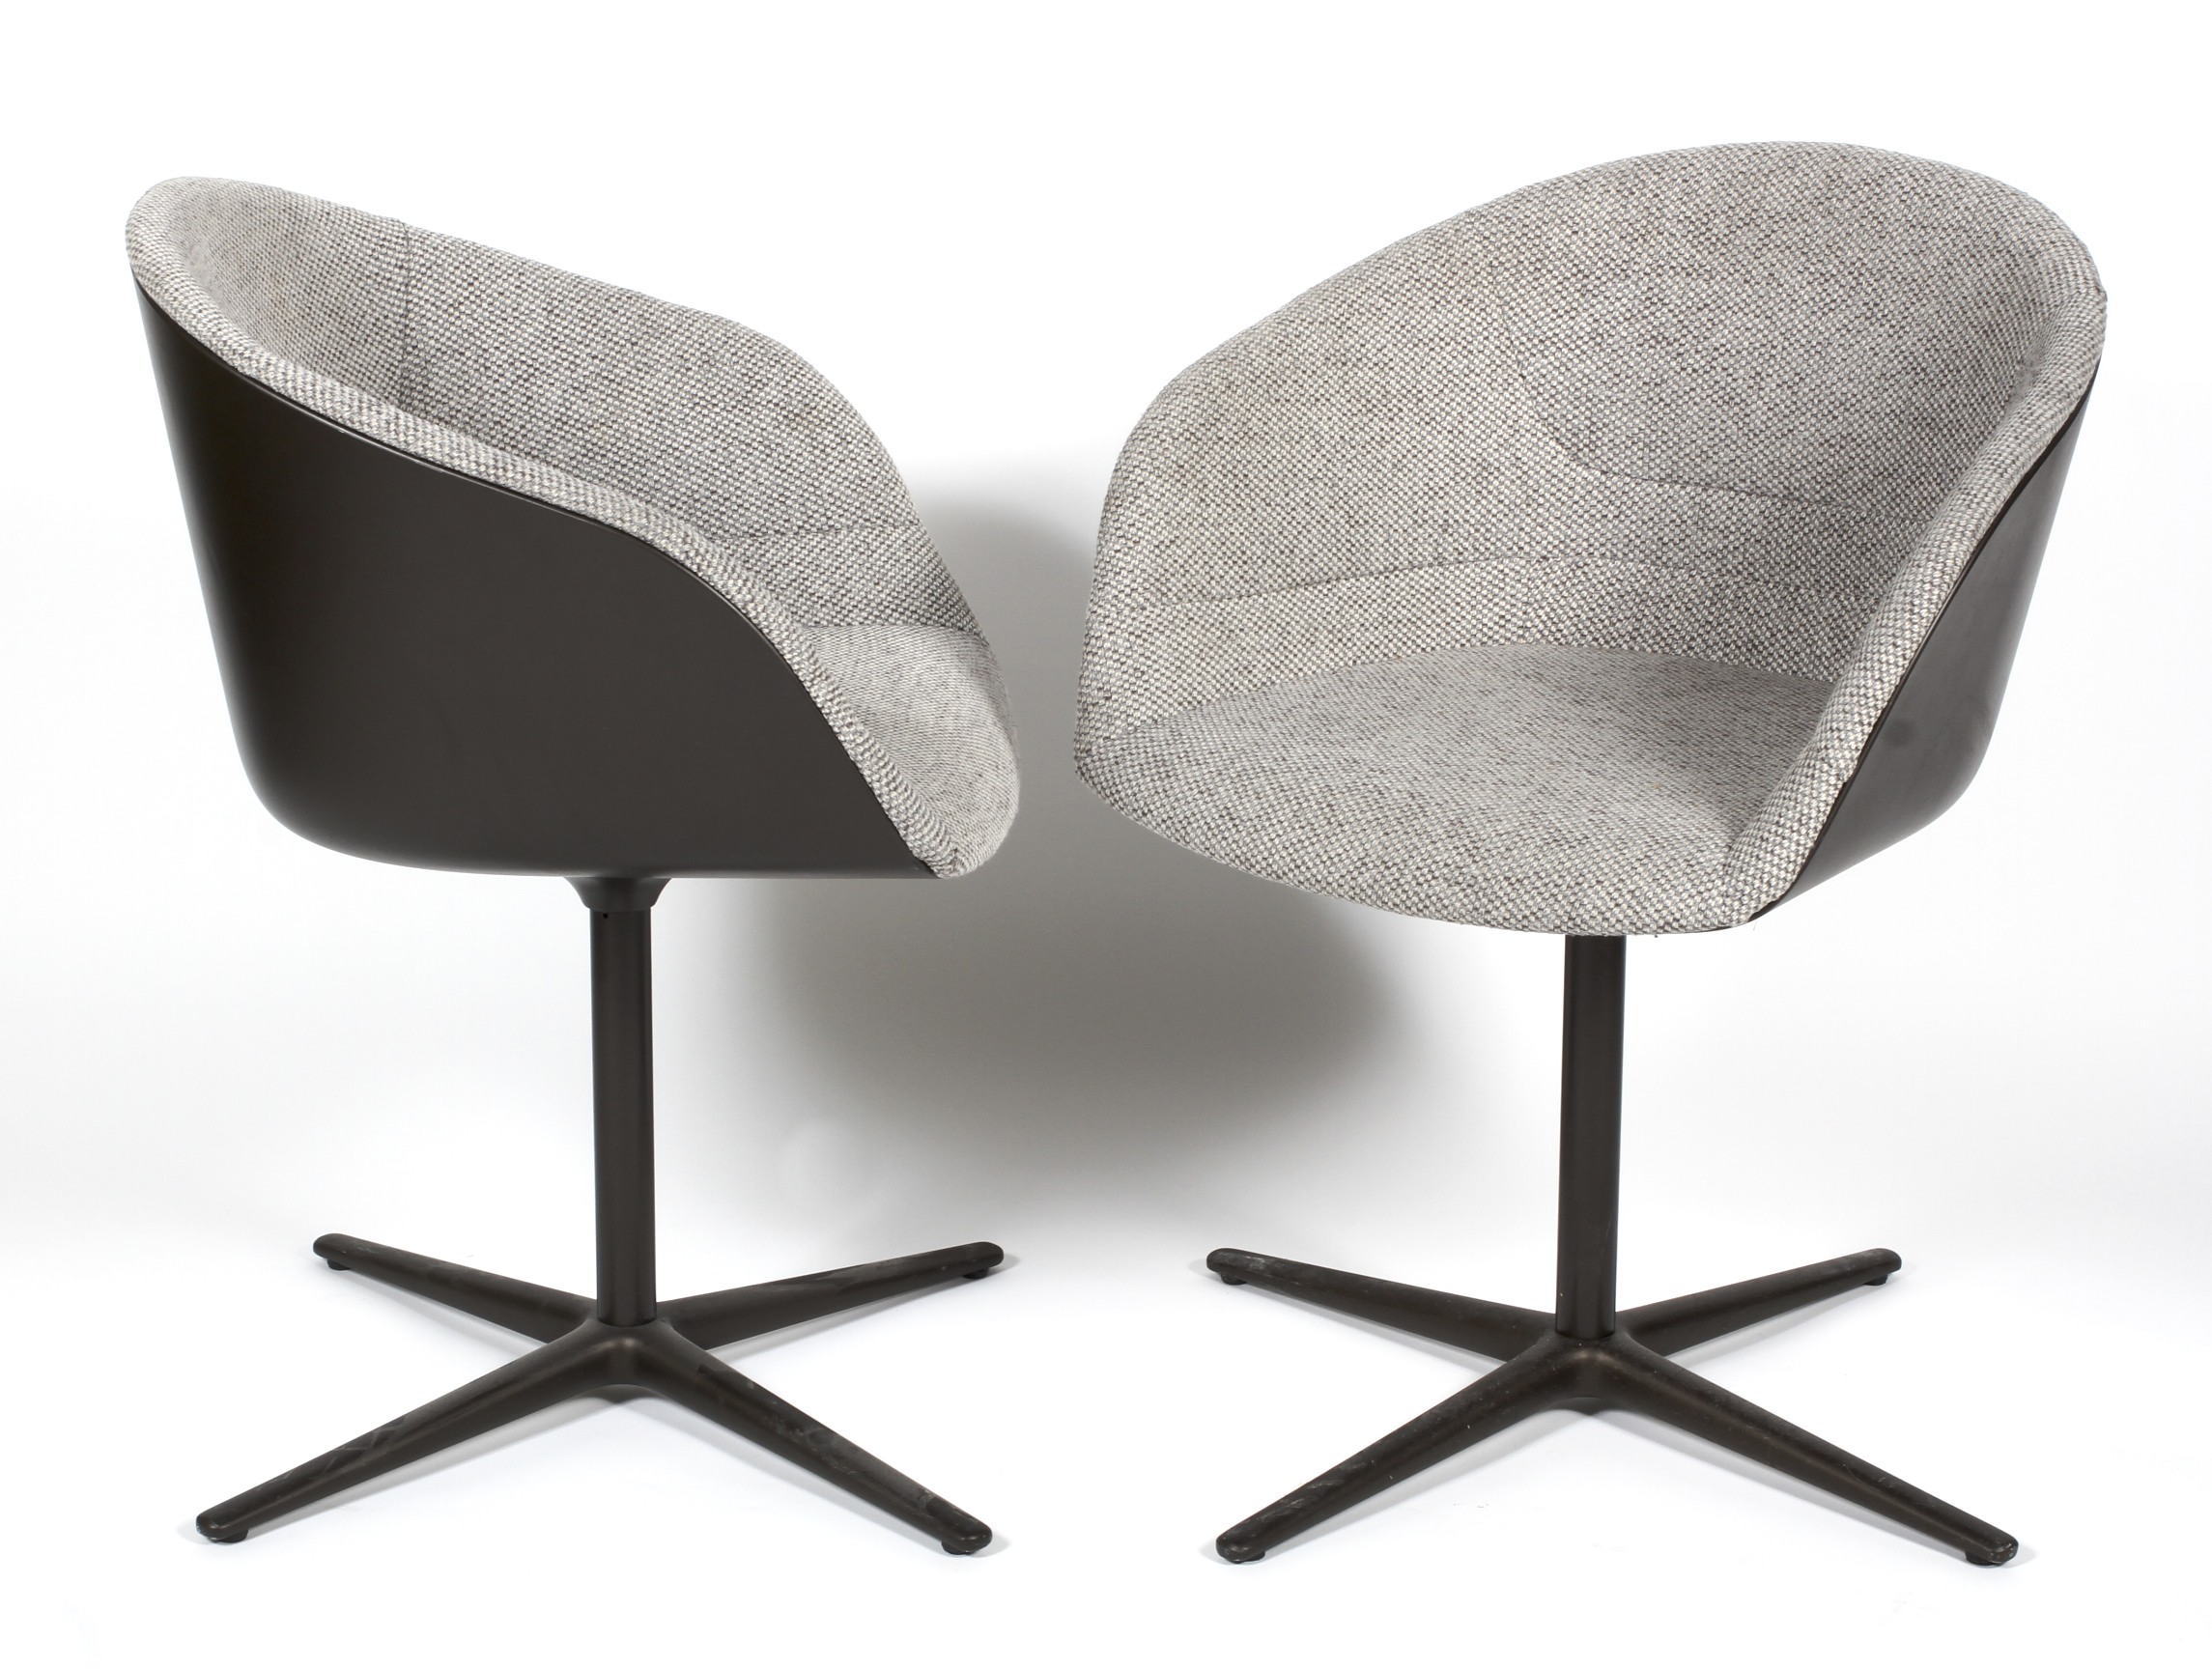 Four Walter Knoll Kyo swivel chairs. - Image 2 of 2